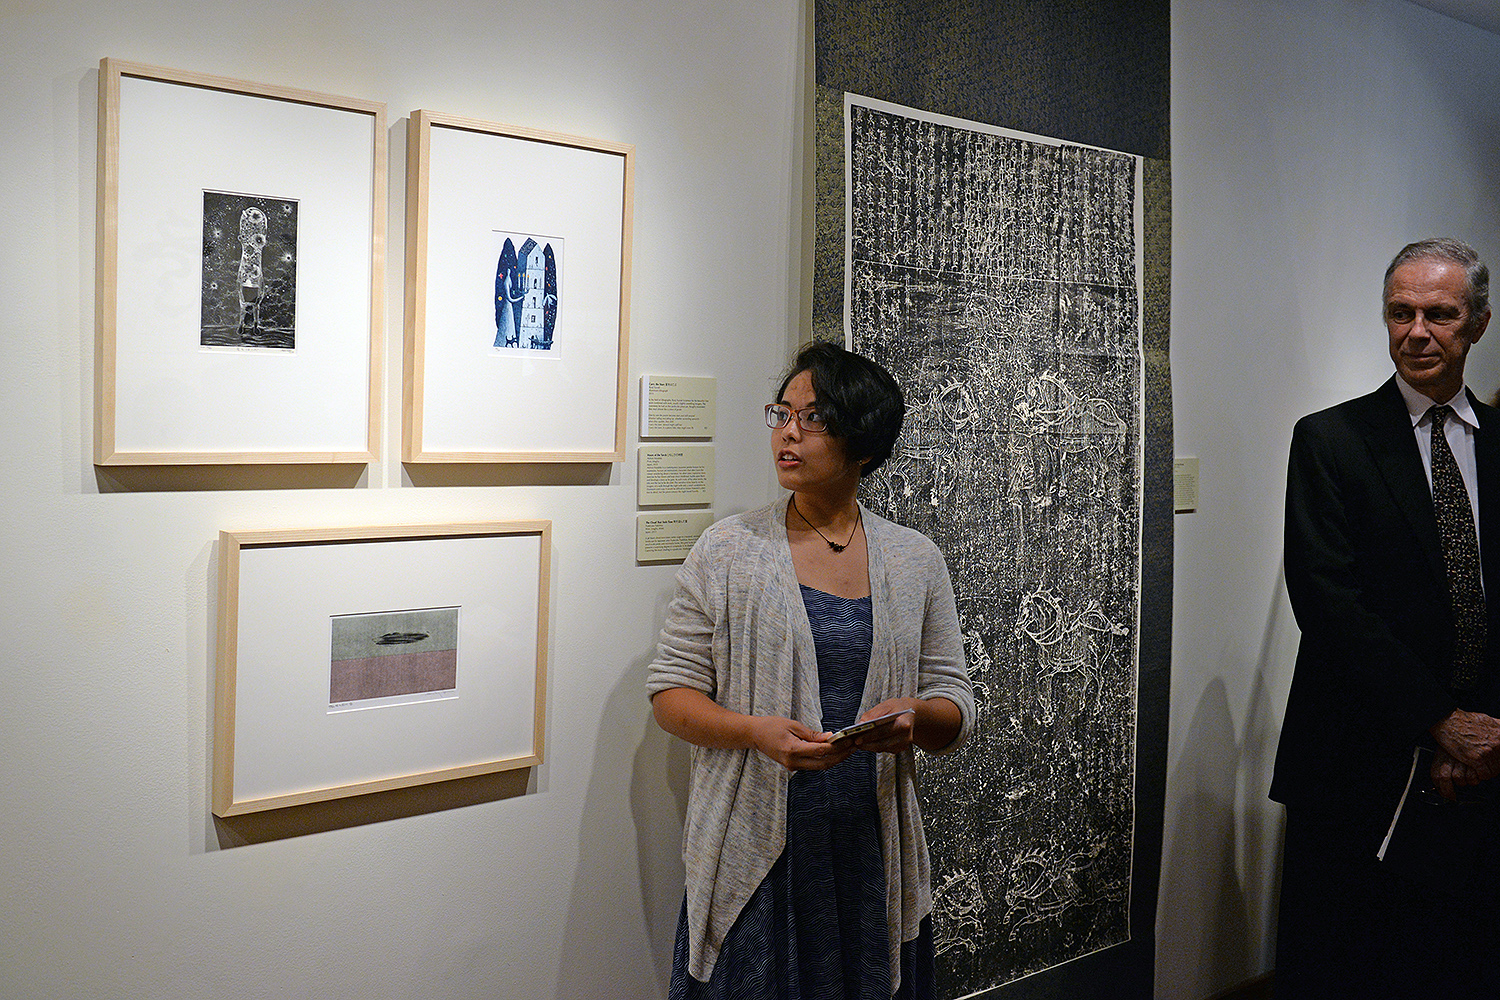 Erin Deleon ’17 speaks about an aluminum lithograph titled “Carry the Stars (2013).” The artist, Ryoji Suzuki, is known for his beautiful line work combined with stark, unsettling imagery. 